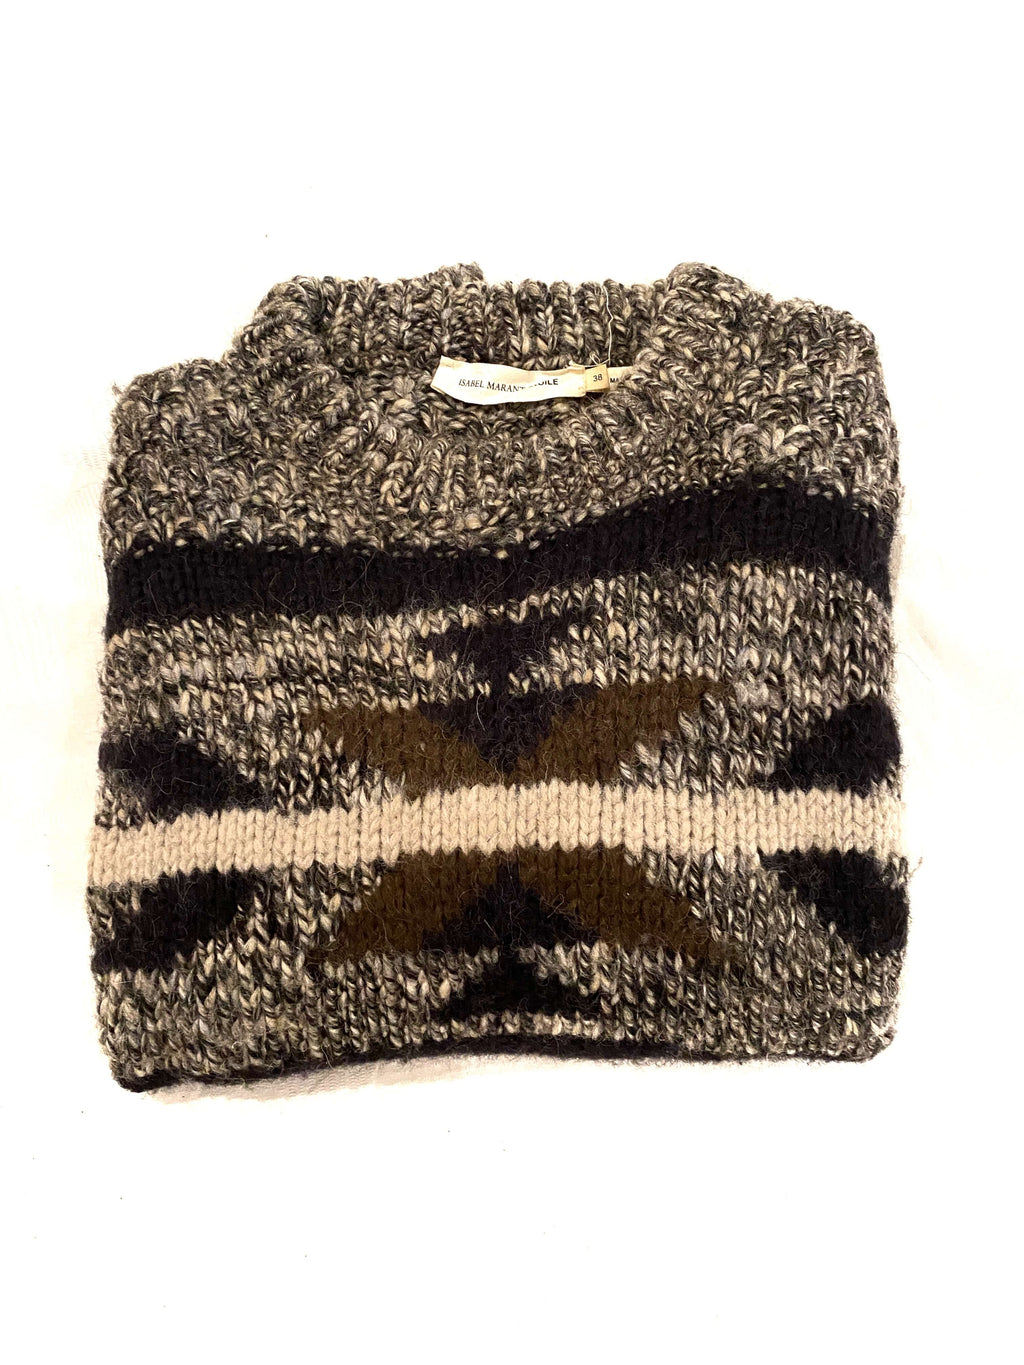 Isabel Marant sweater, grey, wool and alpaga, with black and brown pattern